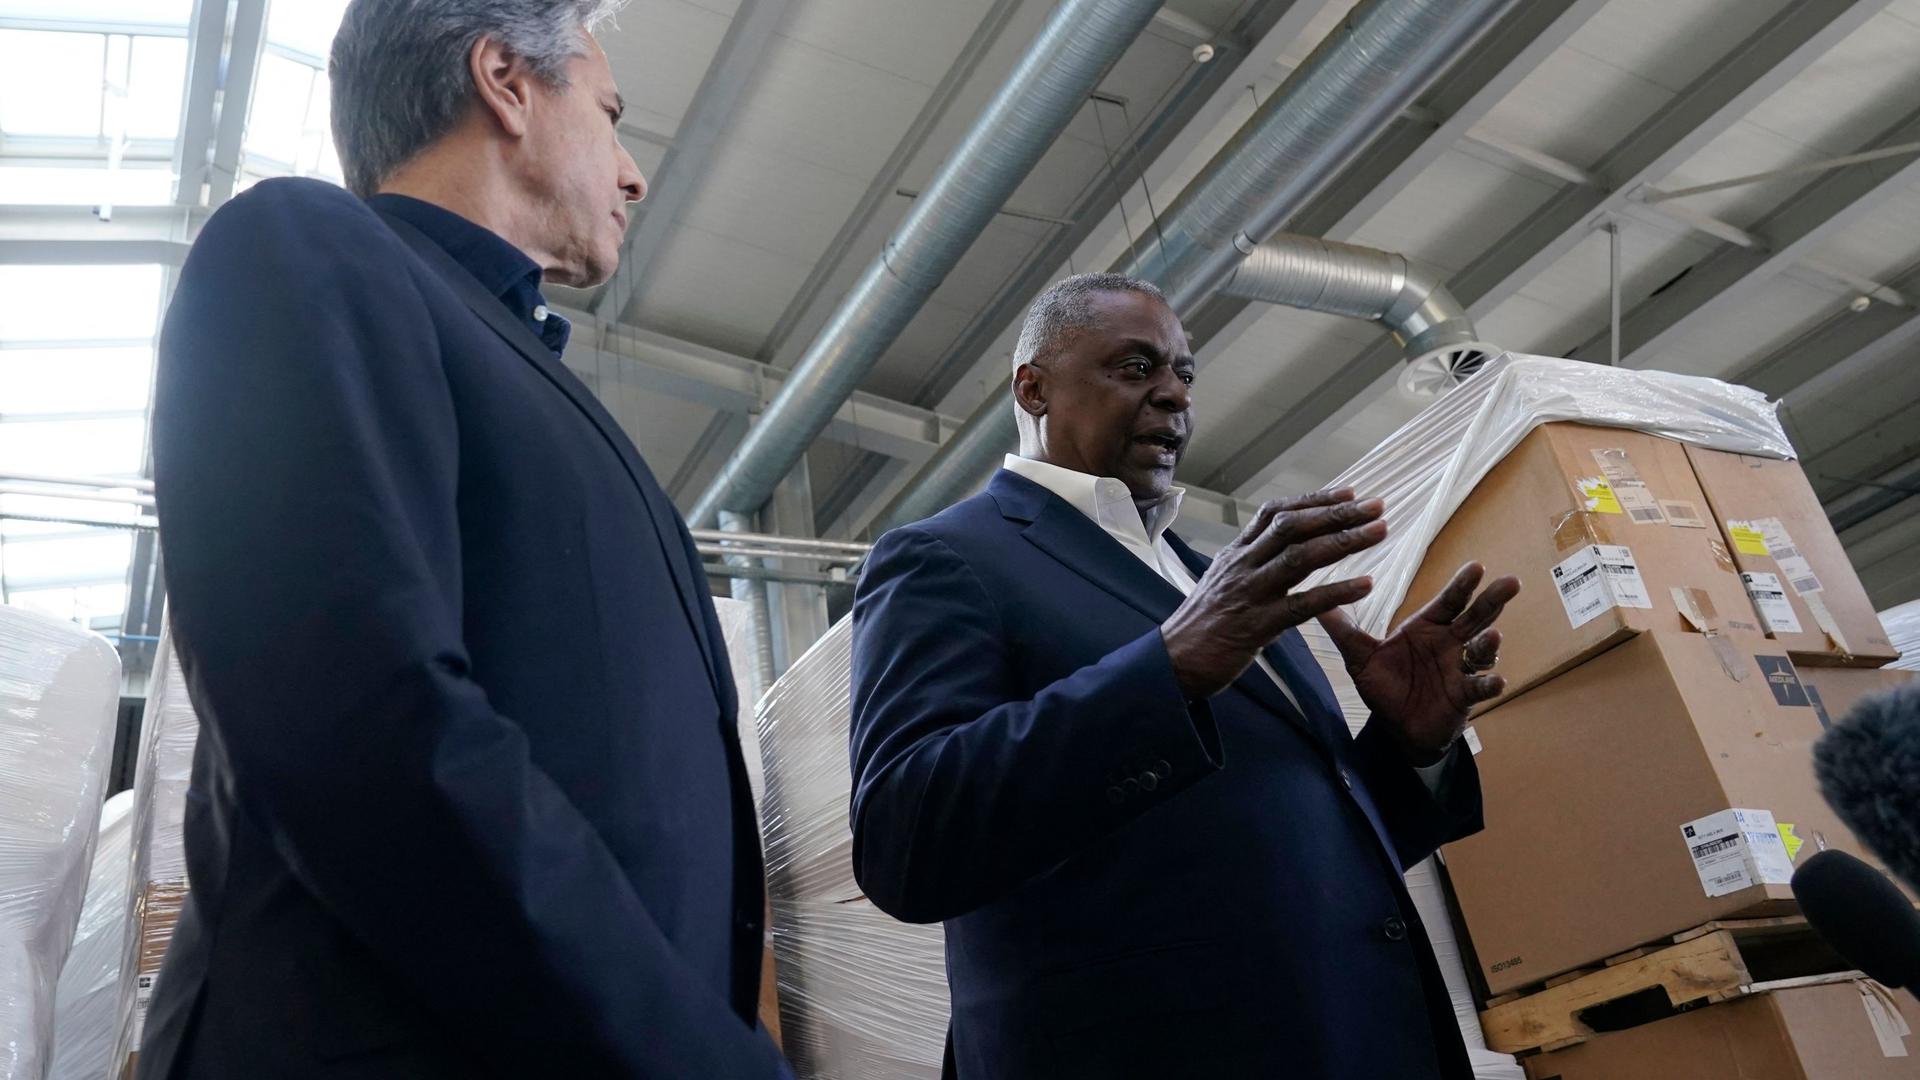 Pallets of aid to Ukraine are stacked behind US Defense Secretary Lloyd Austin (R) and Secretary of State Antony Blinken (L) as they speak with reporters after returning from their trip to Kyiv, Ukraine, on Sunday.